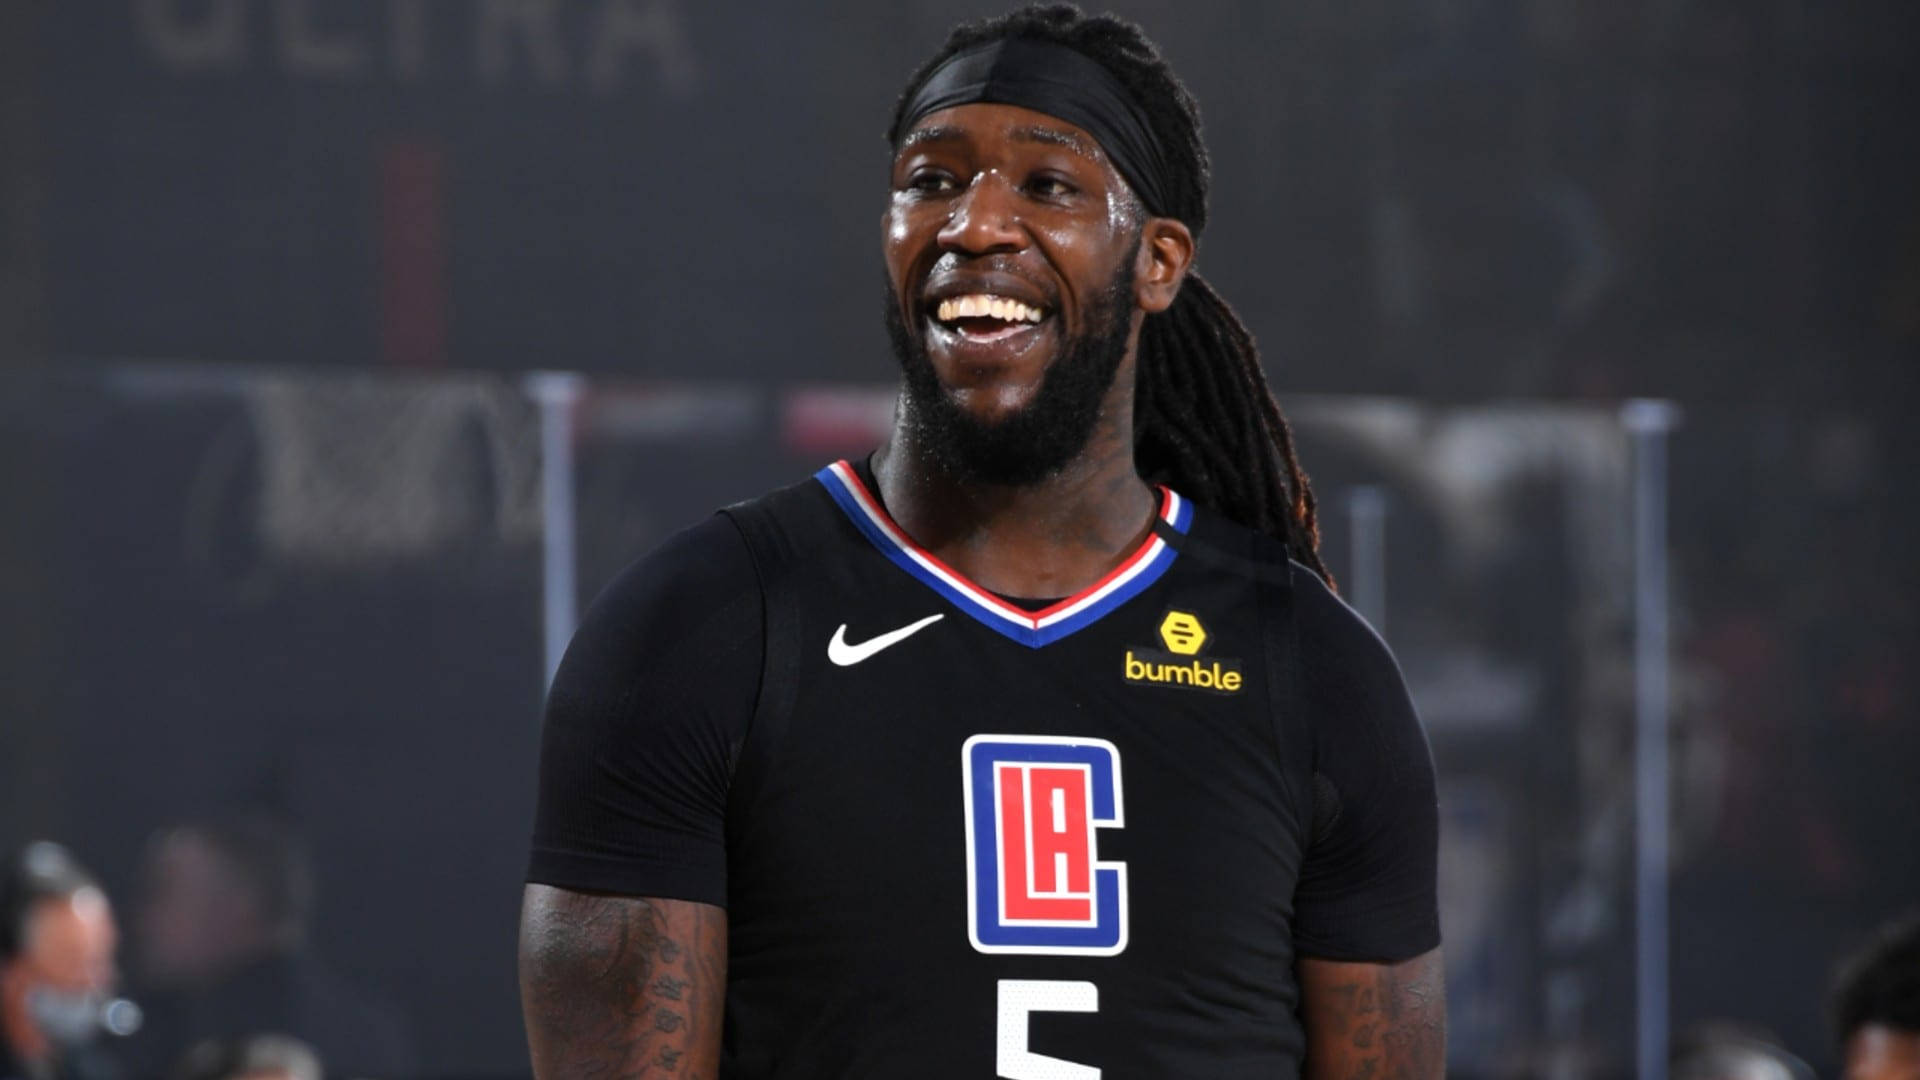 Smiling Montrezl Harrell, Player Of The Clippers, During A Game